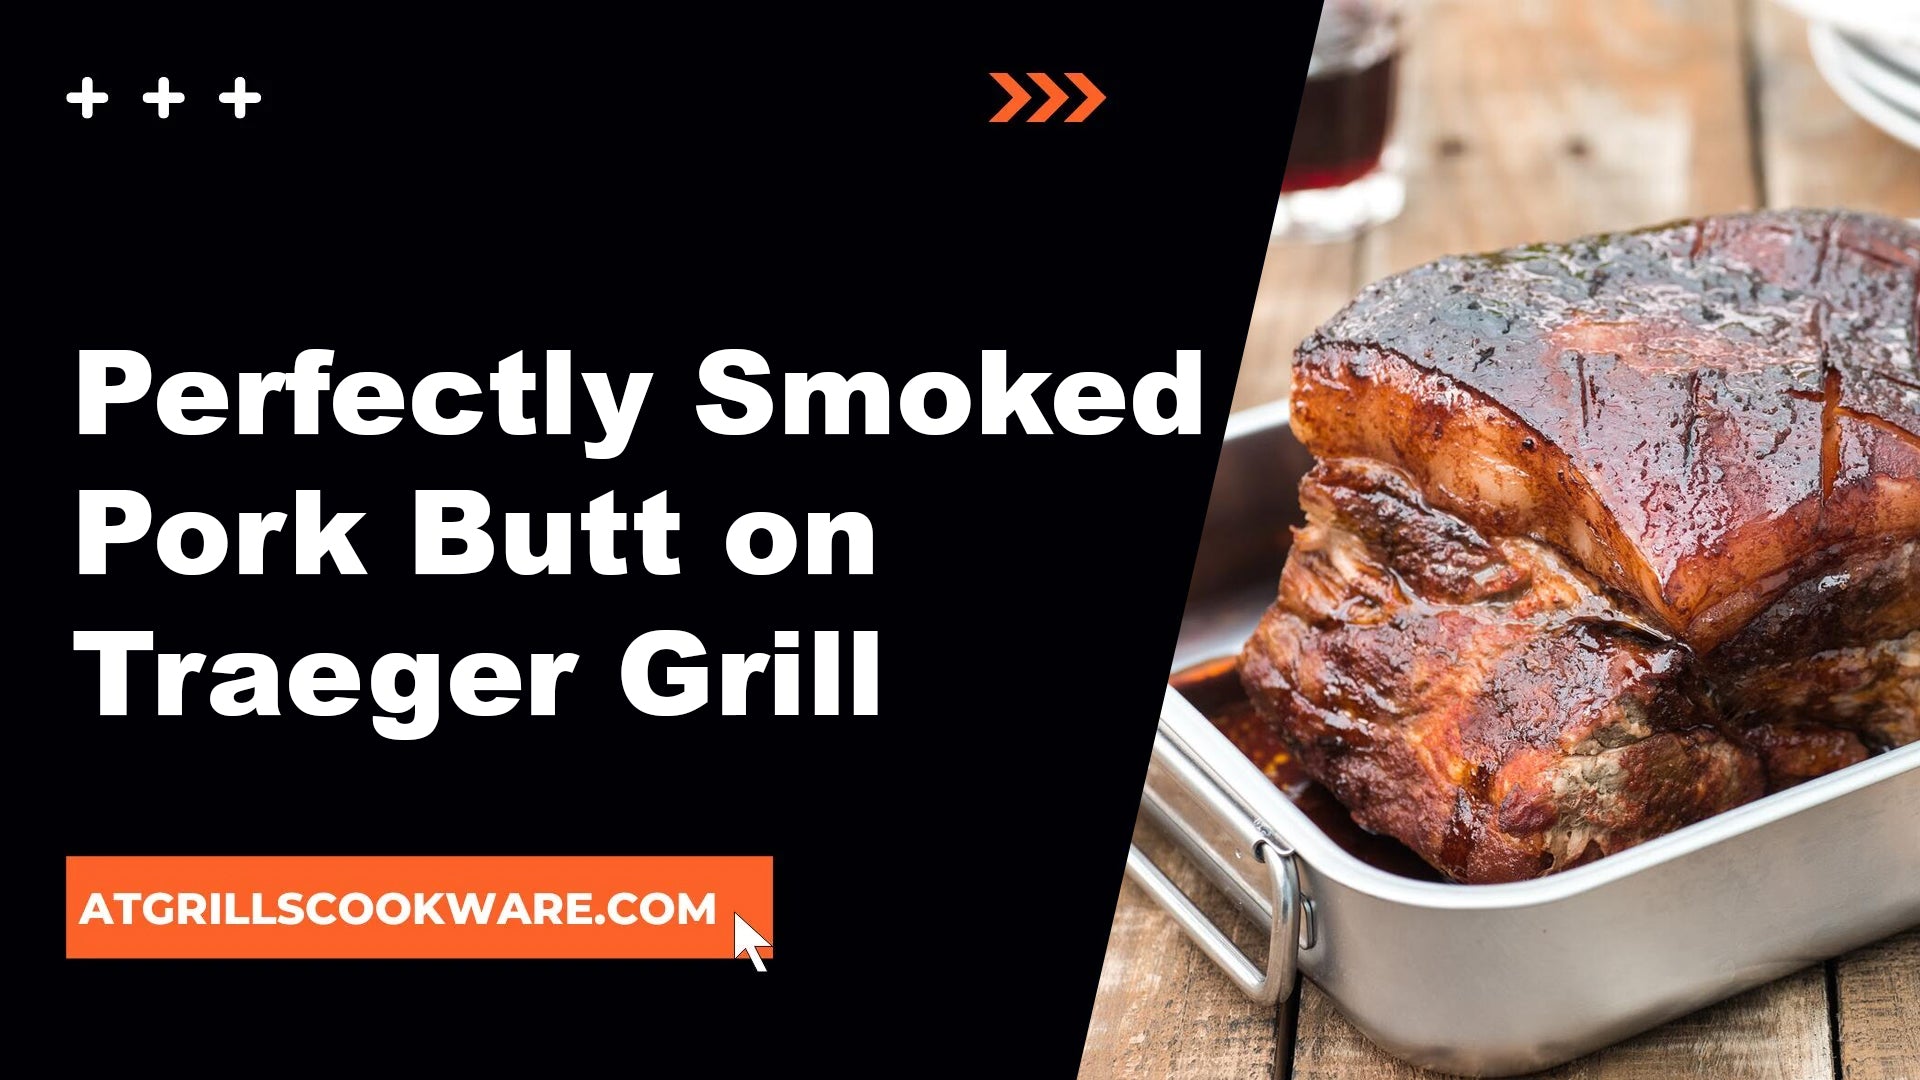 How to Smoke the Perfect Pork Butt on a Traeger Grill